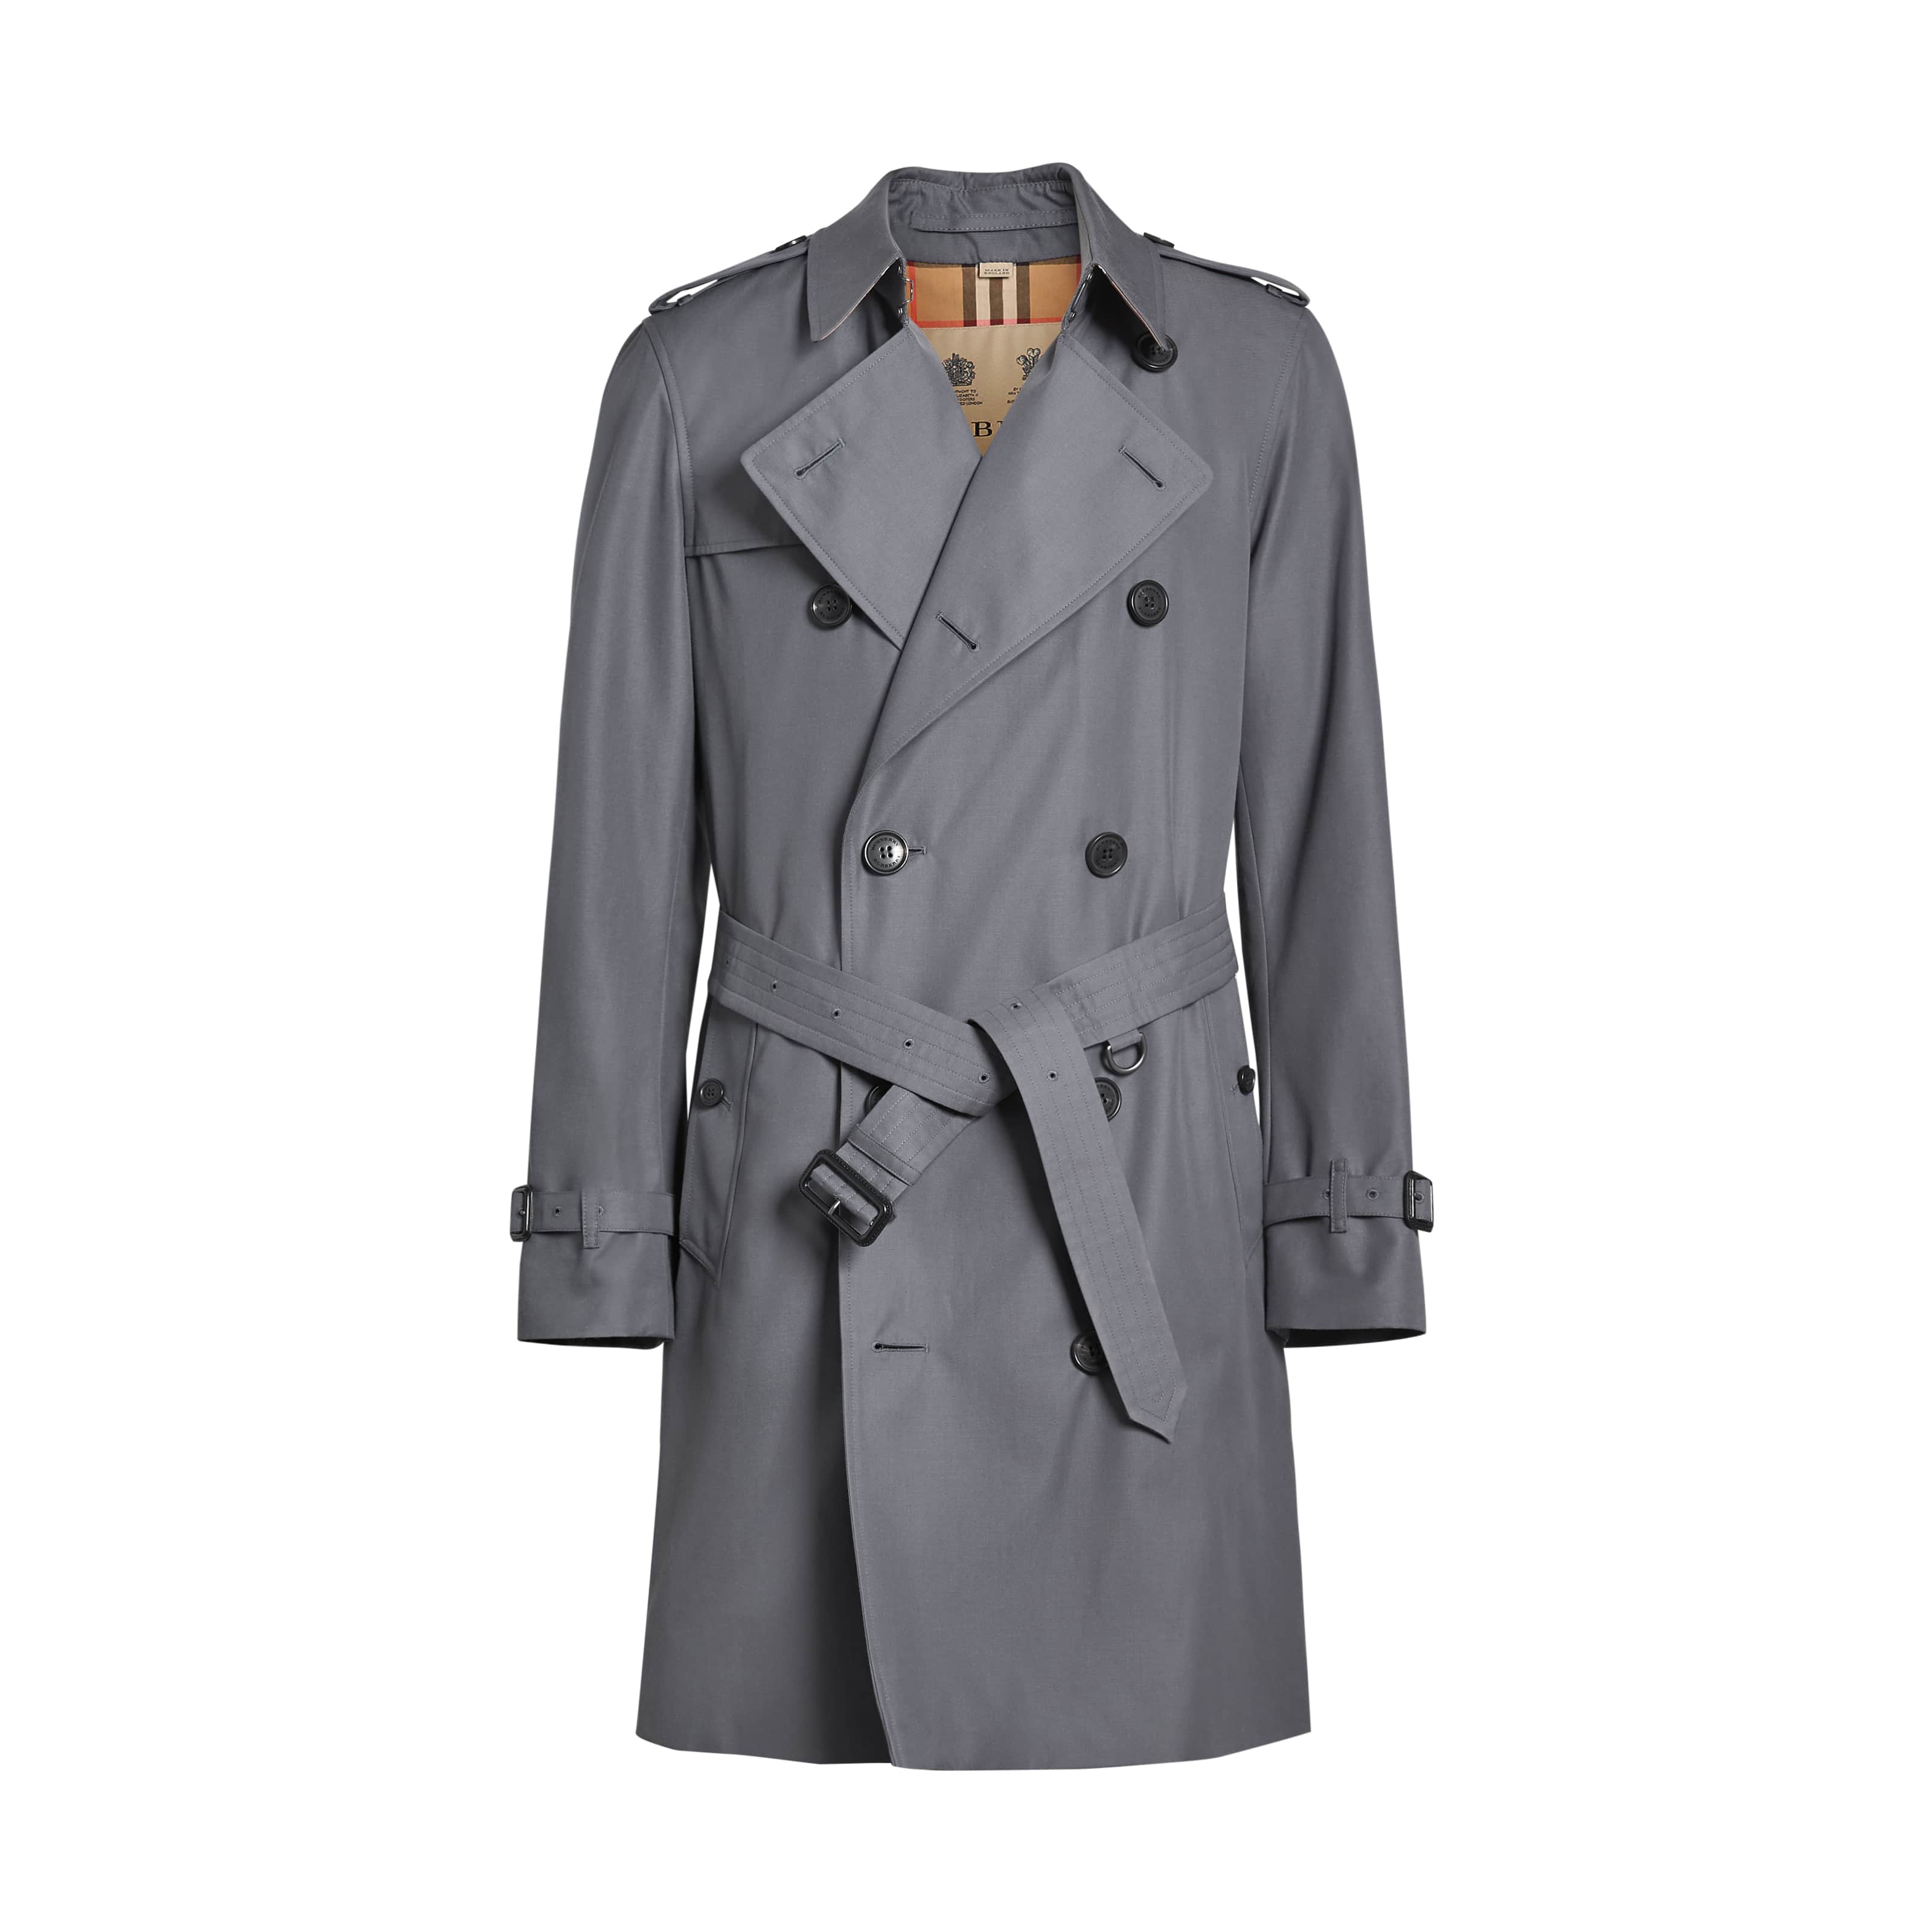 Burberry Heritage Mens Trench Coat_001-min | Pamper.My